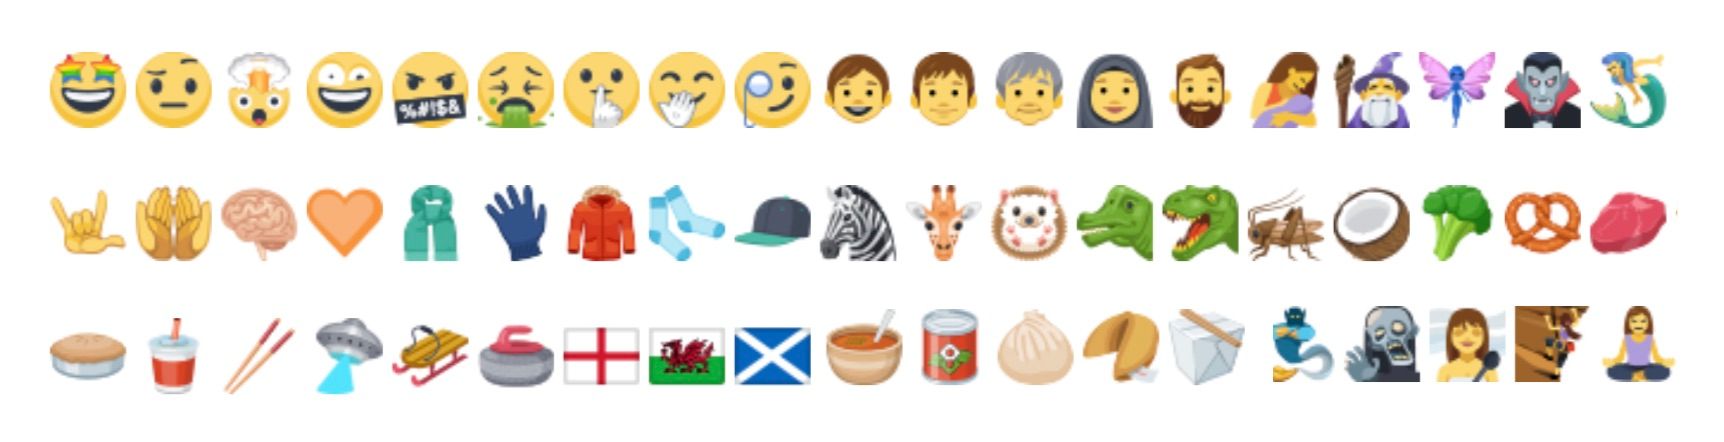 New Emojis Now Showing On Facebook